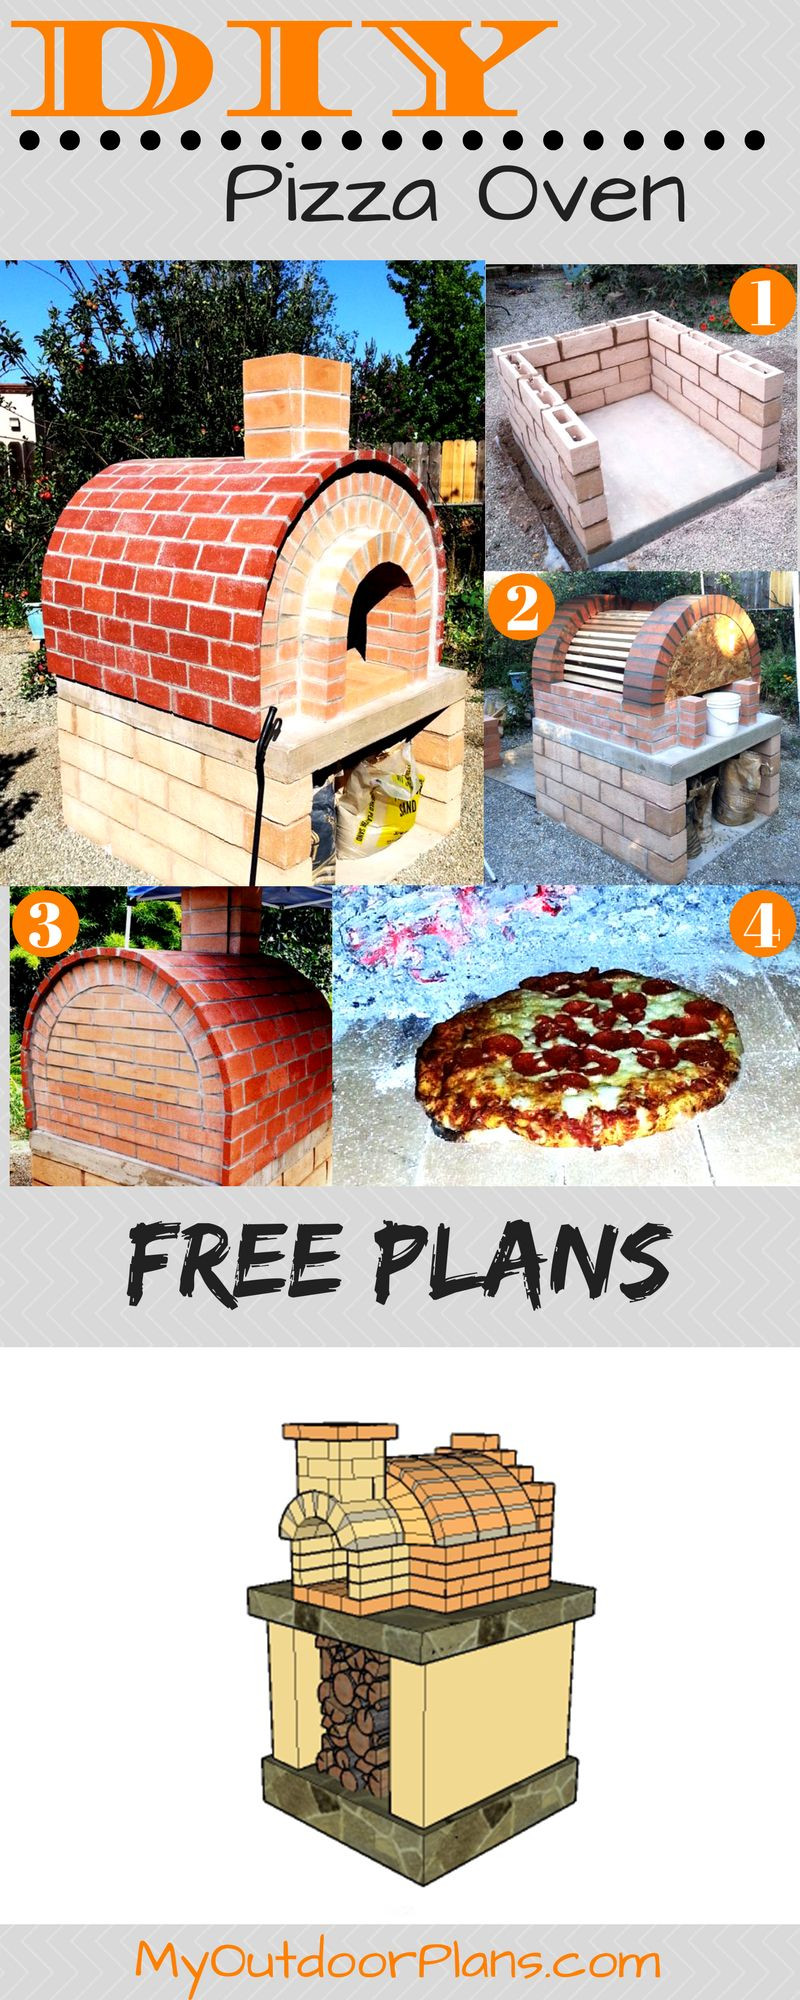 DIY Pizza Oven Plans Free
 Free plans for a brick outdoor pizza oven I have designed